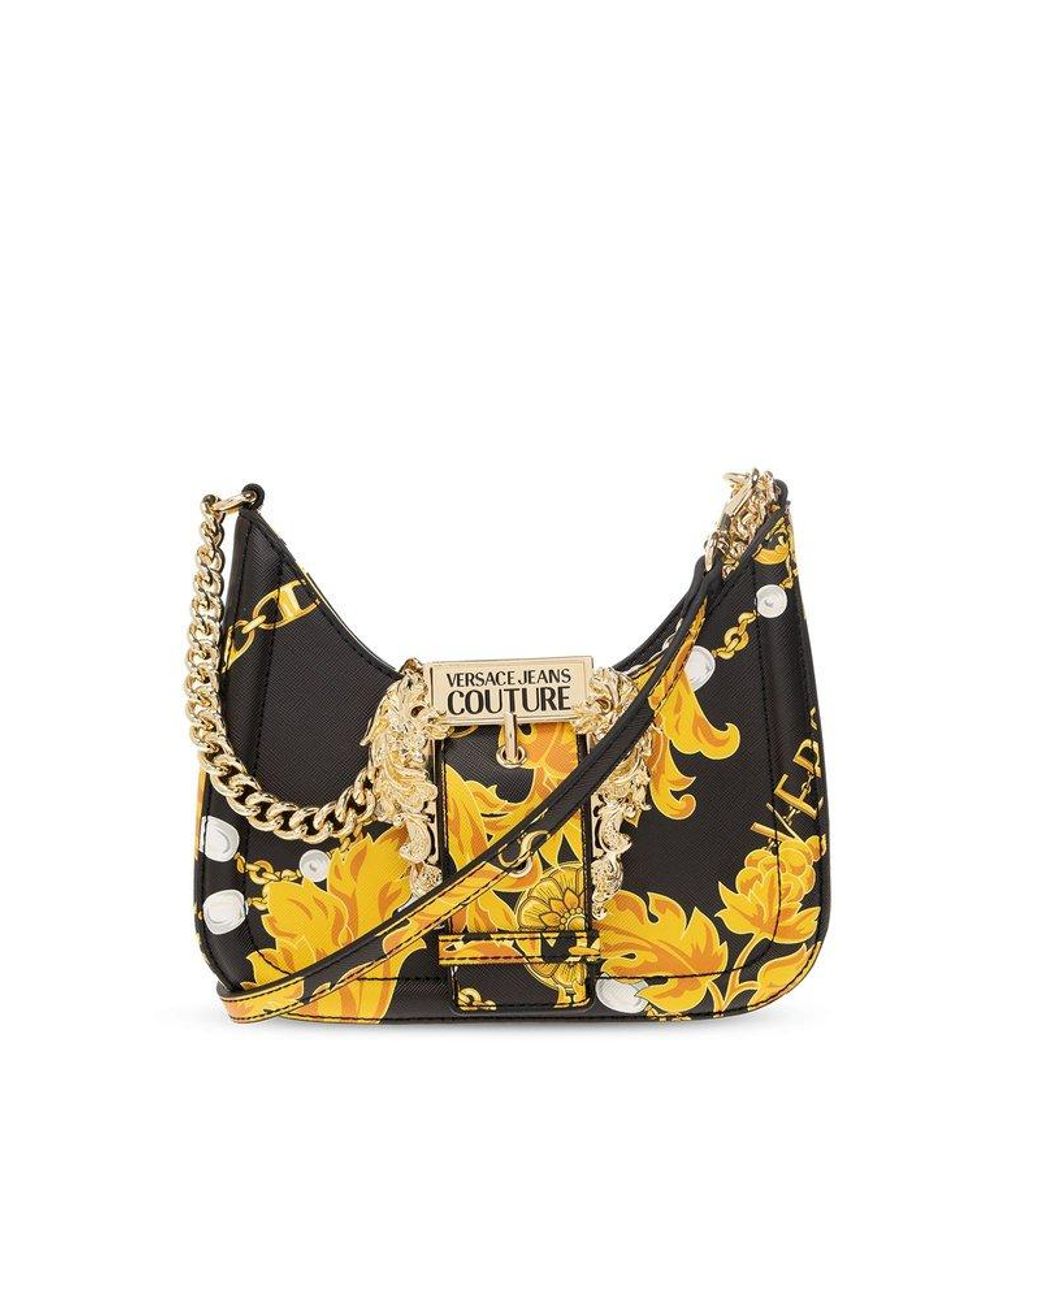 Versace Jeans Couture Logo Brush Couture Printed Shoulder Bag in Pink